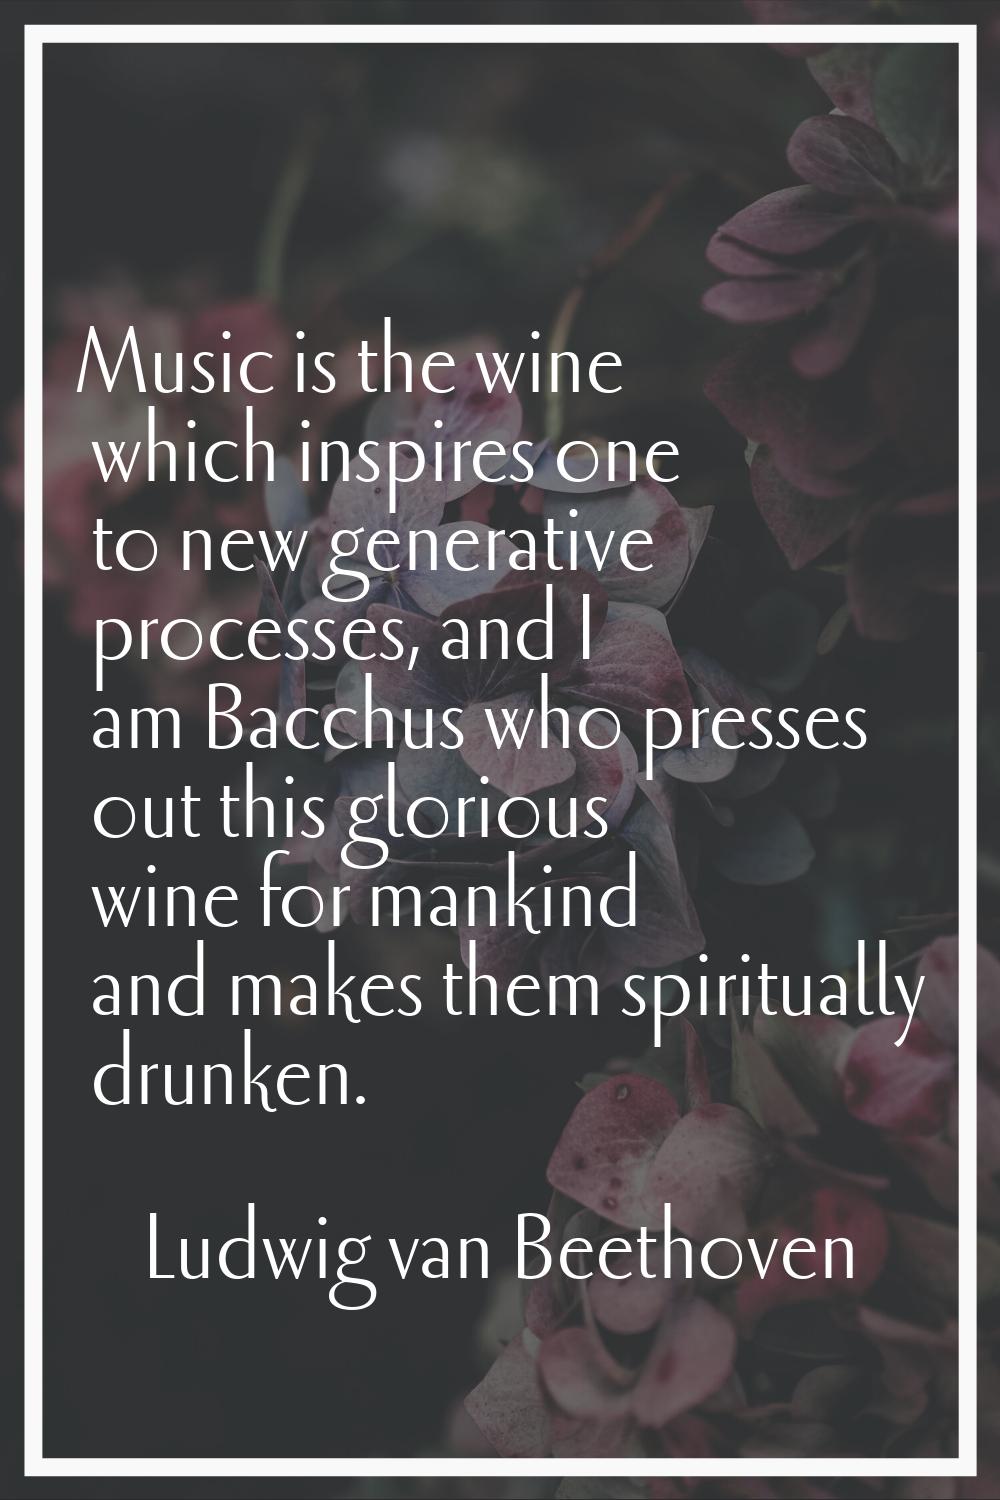 Music is the wine which inspires one to new generative processes, and I am Bacchus who presses out 